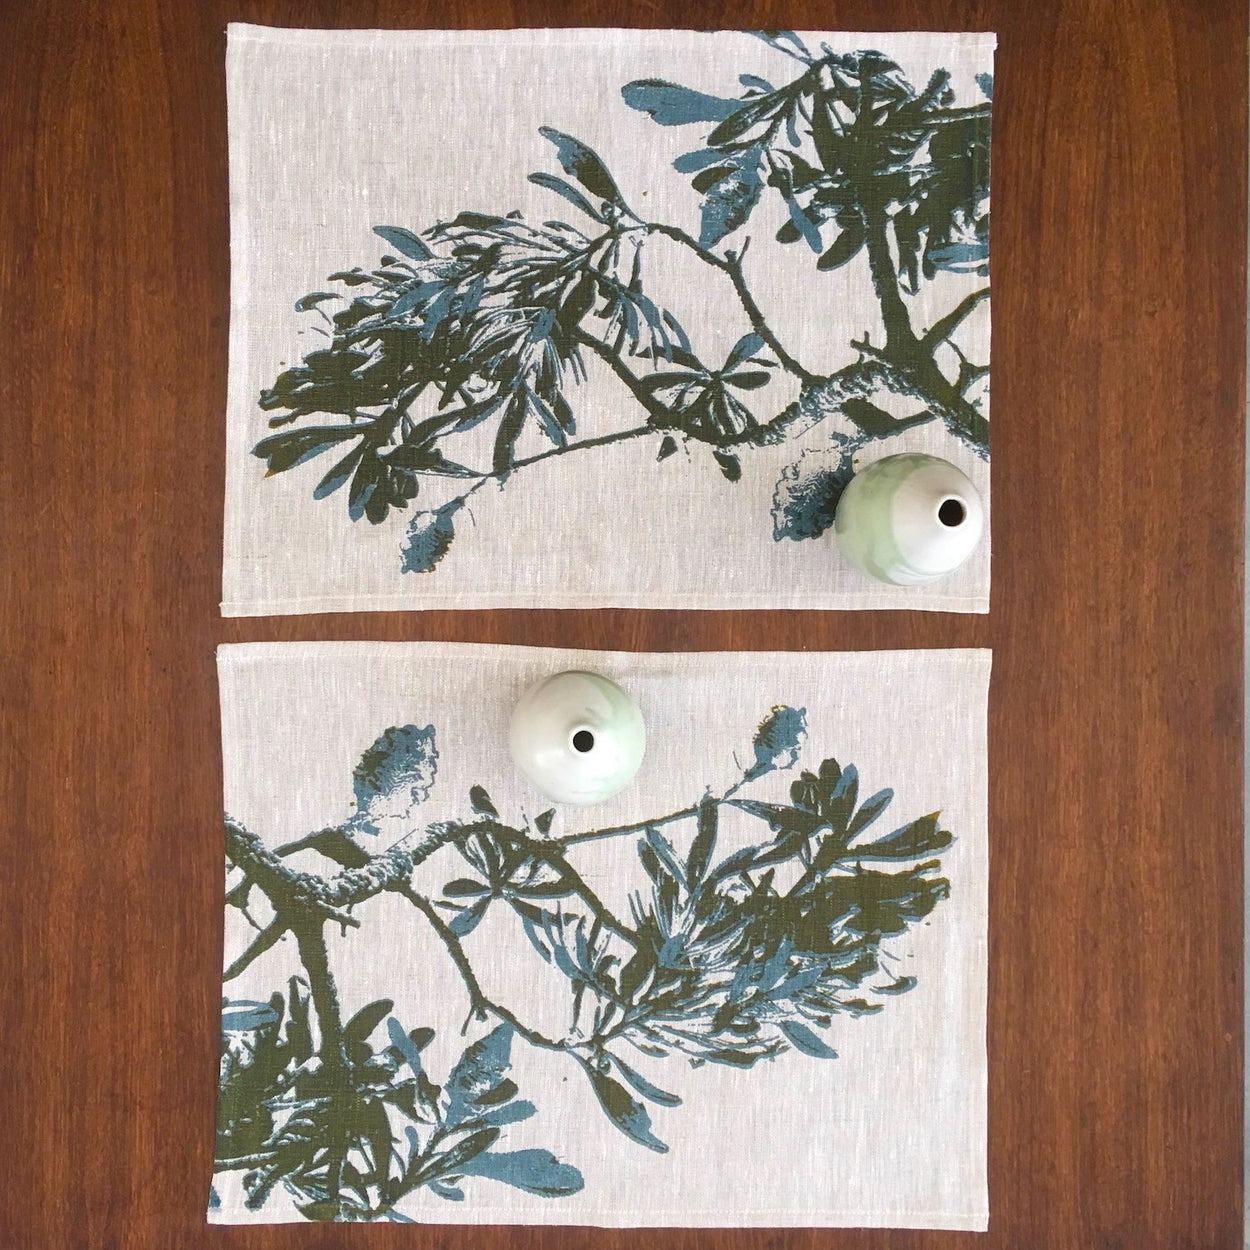 Photograph of a banksia branch screenprinted on placemats.